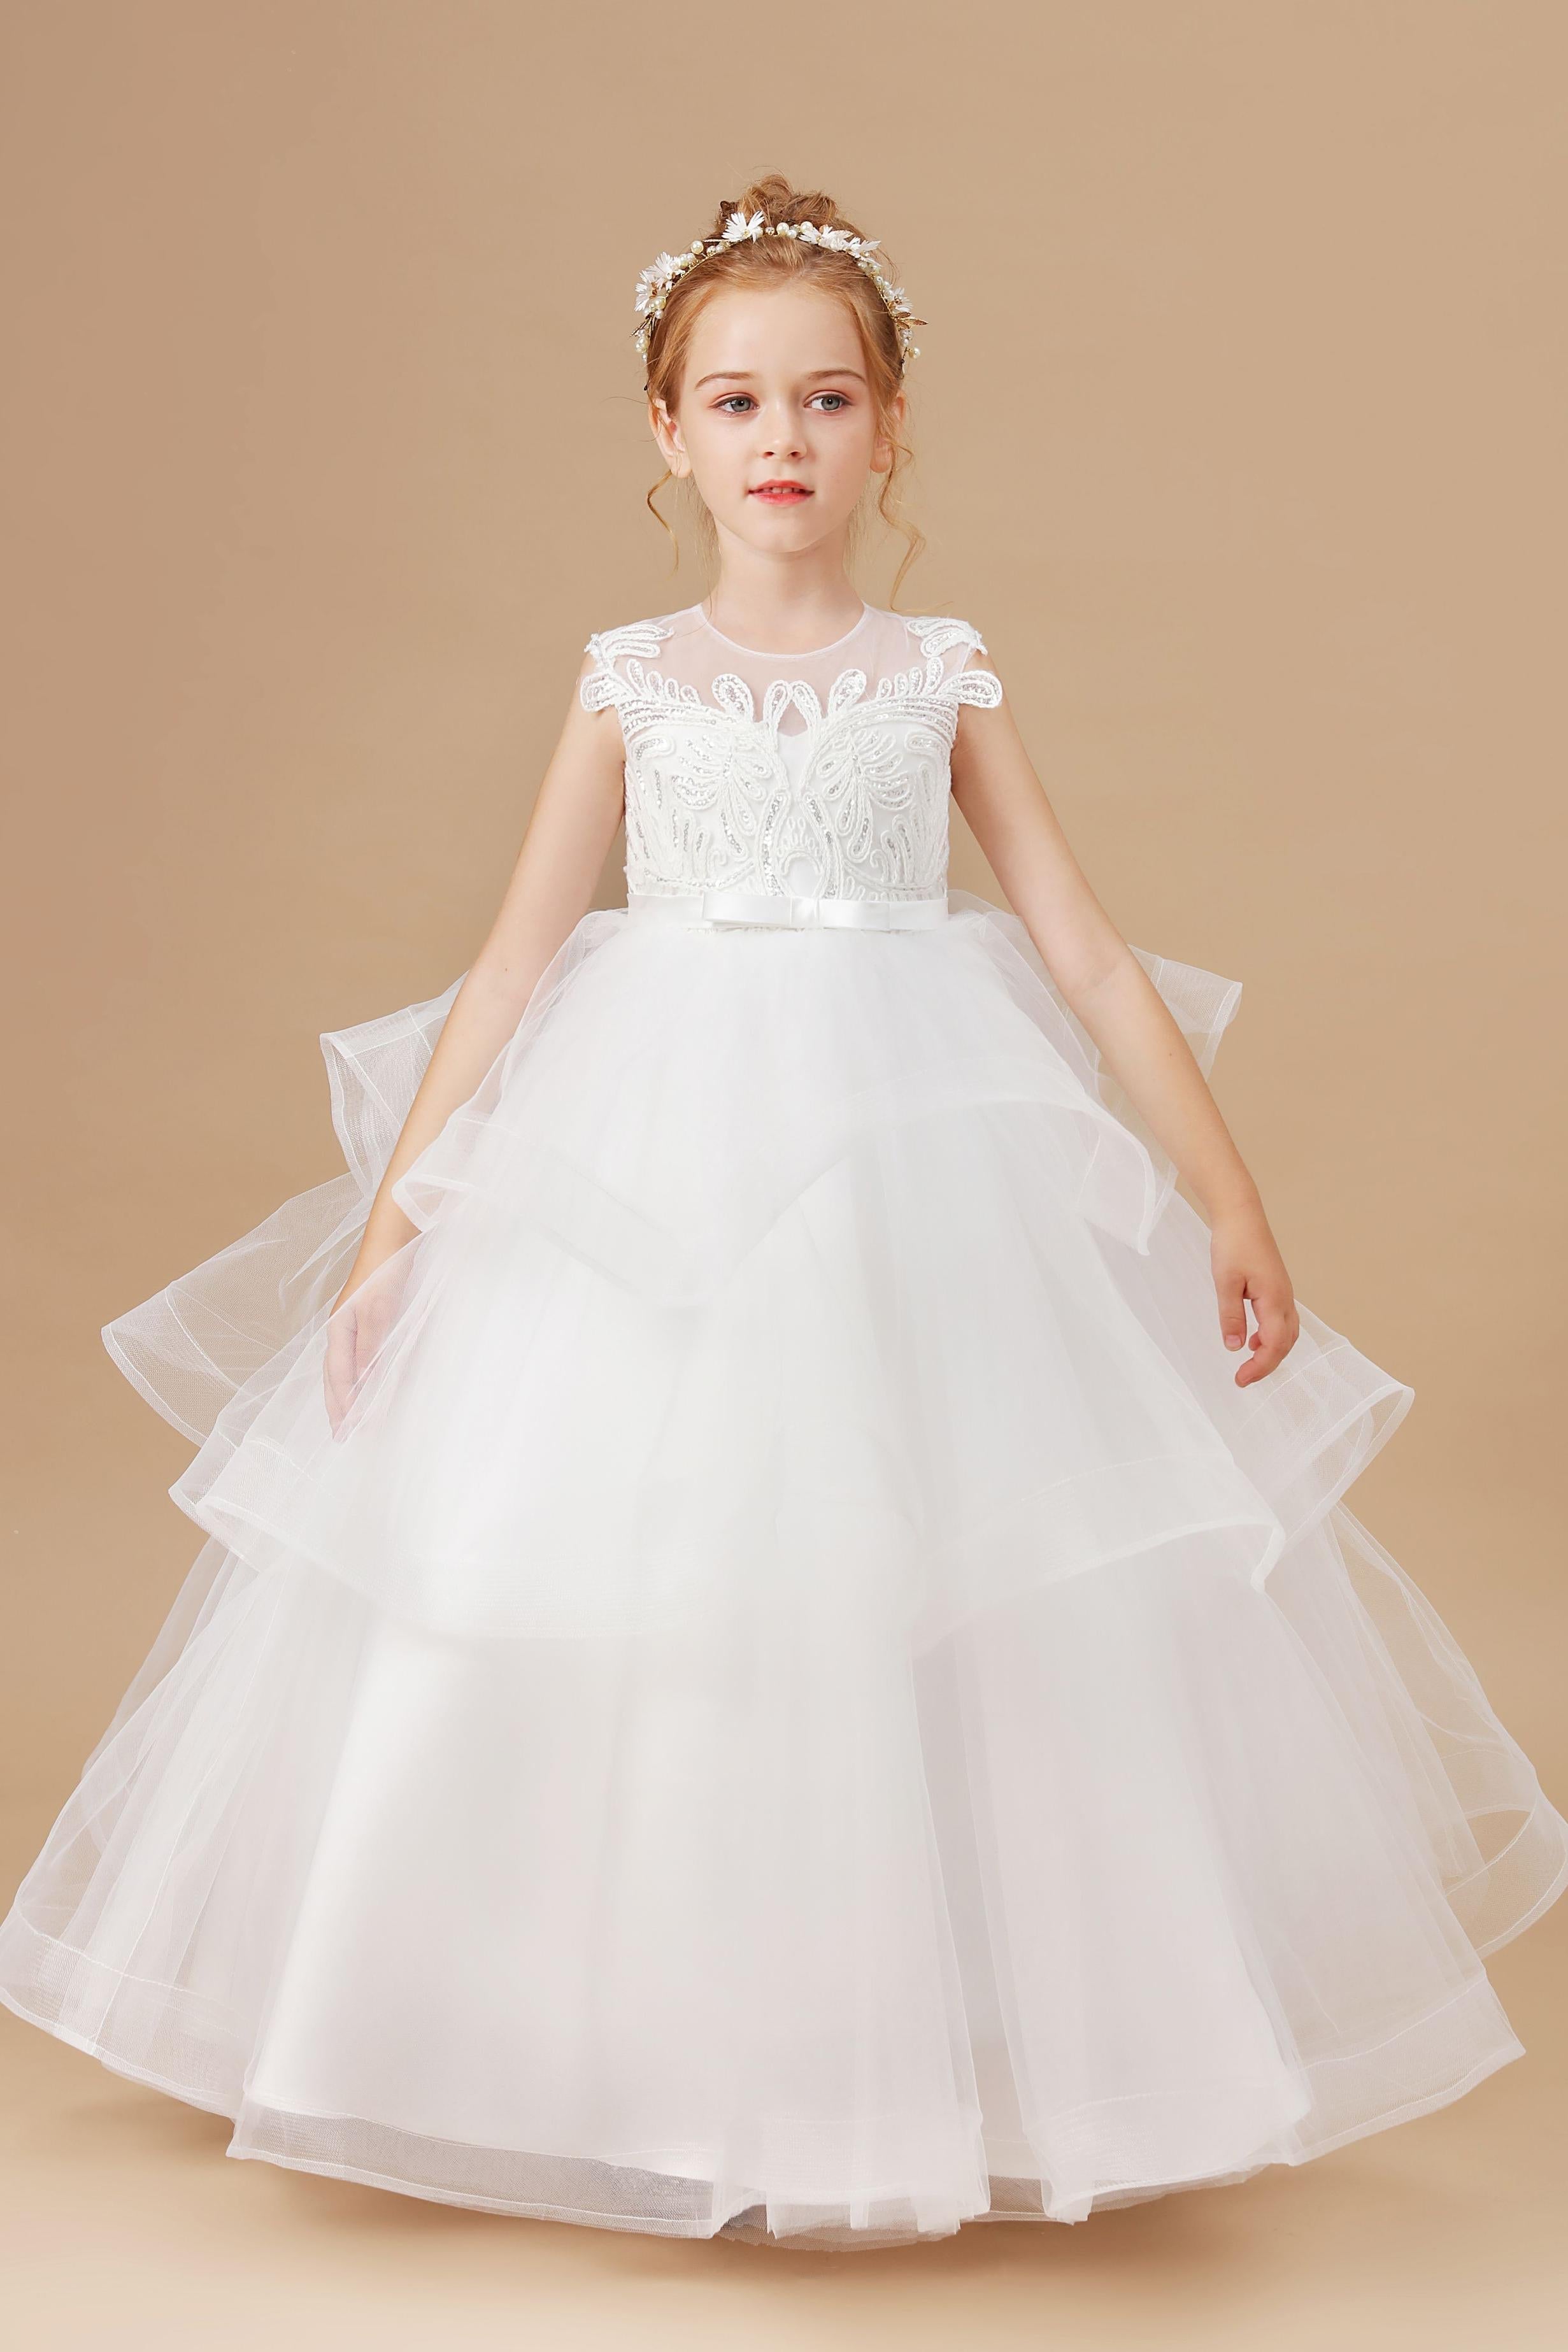 Ivory Tulle Multi-layered Ruffled Flower Girl Dress With Bow